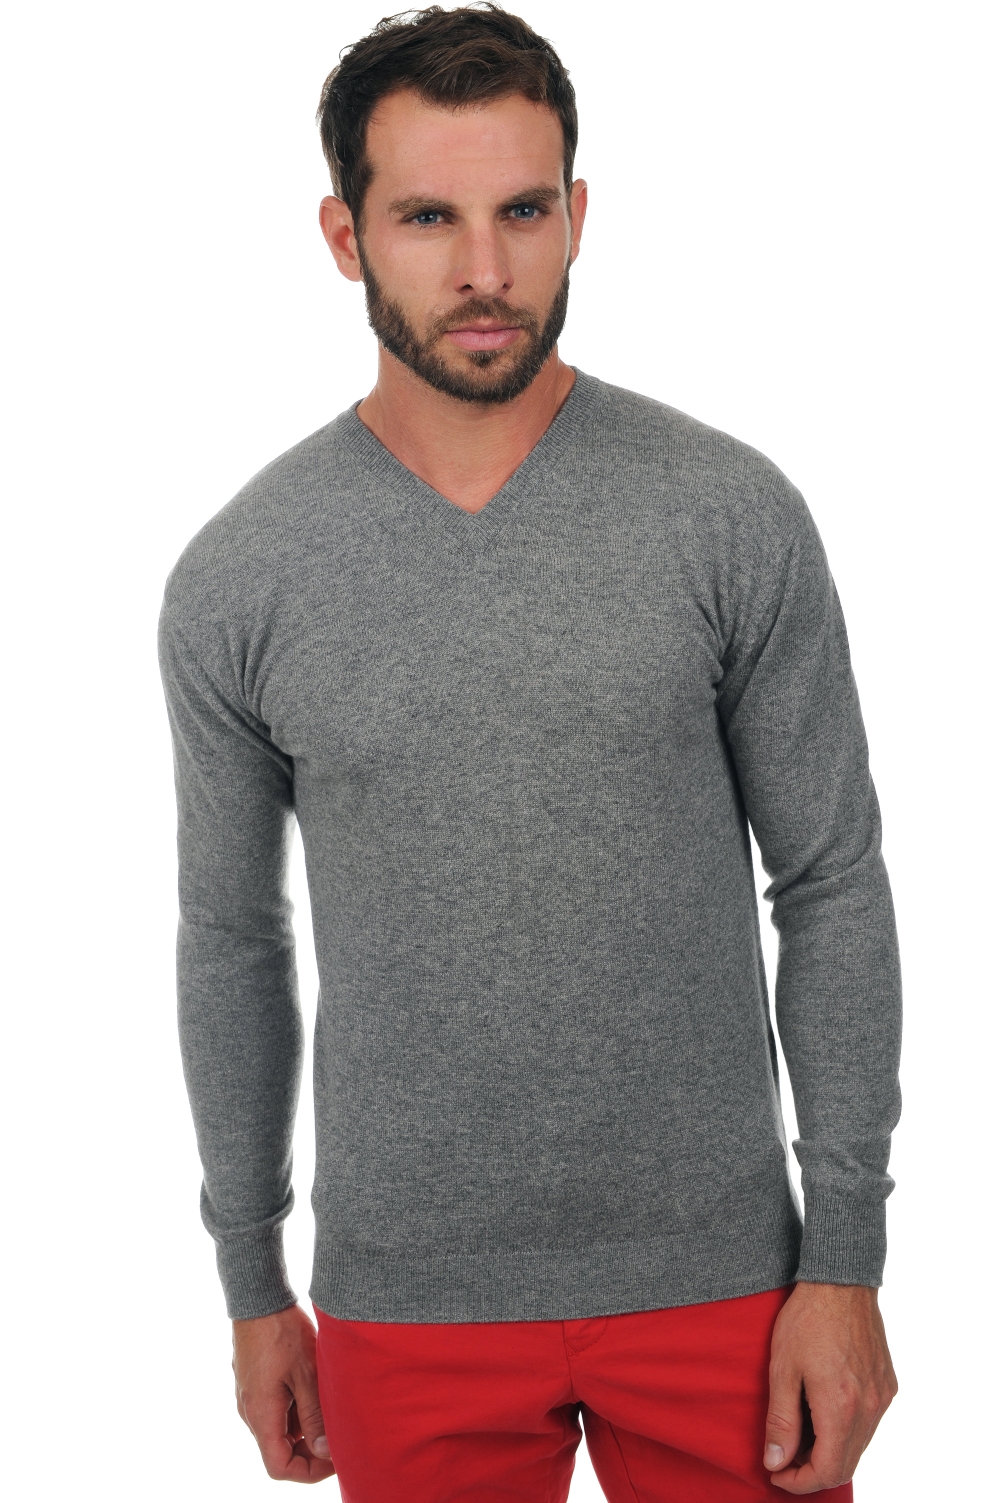 Cachemire pull homme maddox gris chine 4xl